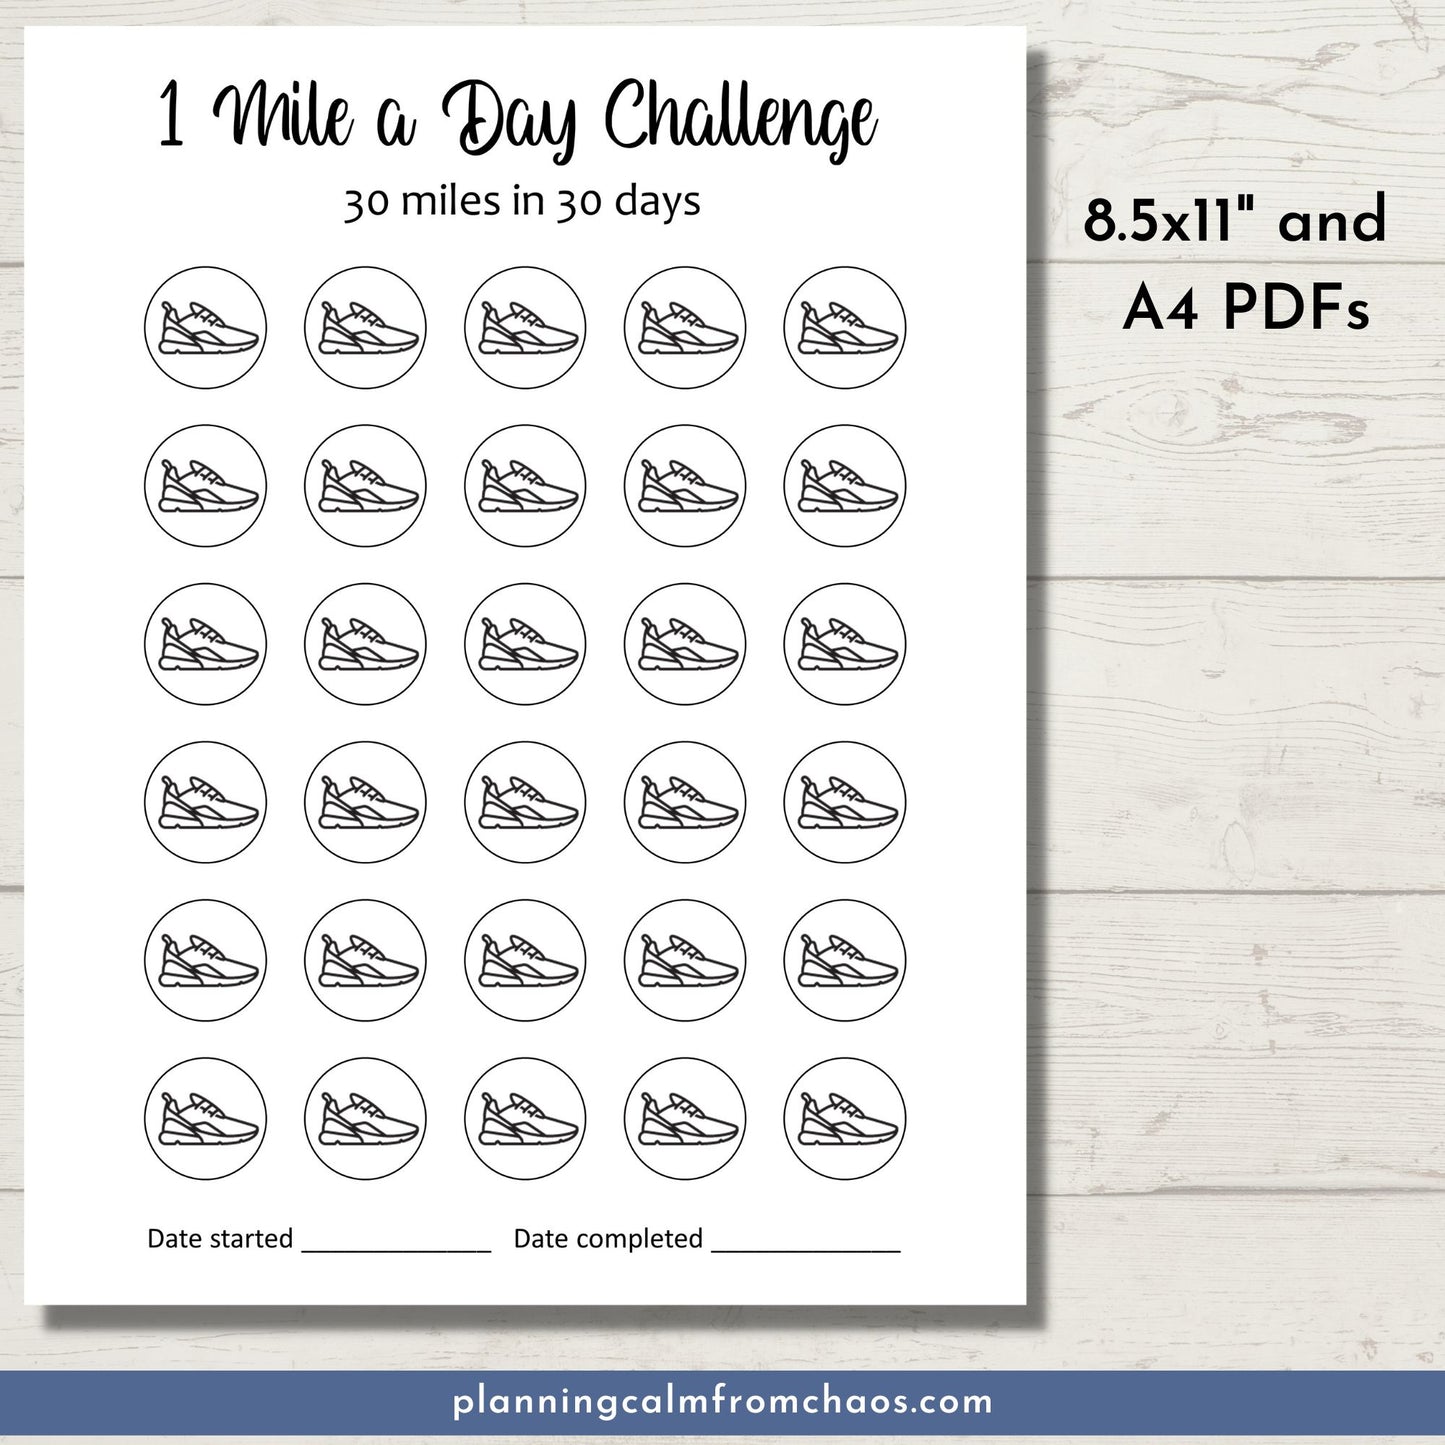 printable 1 mile a day challenge tracker